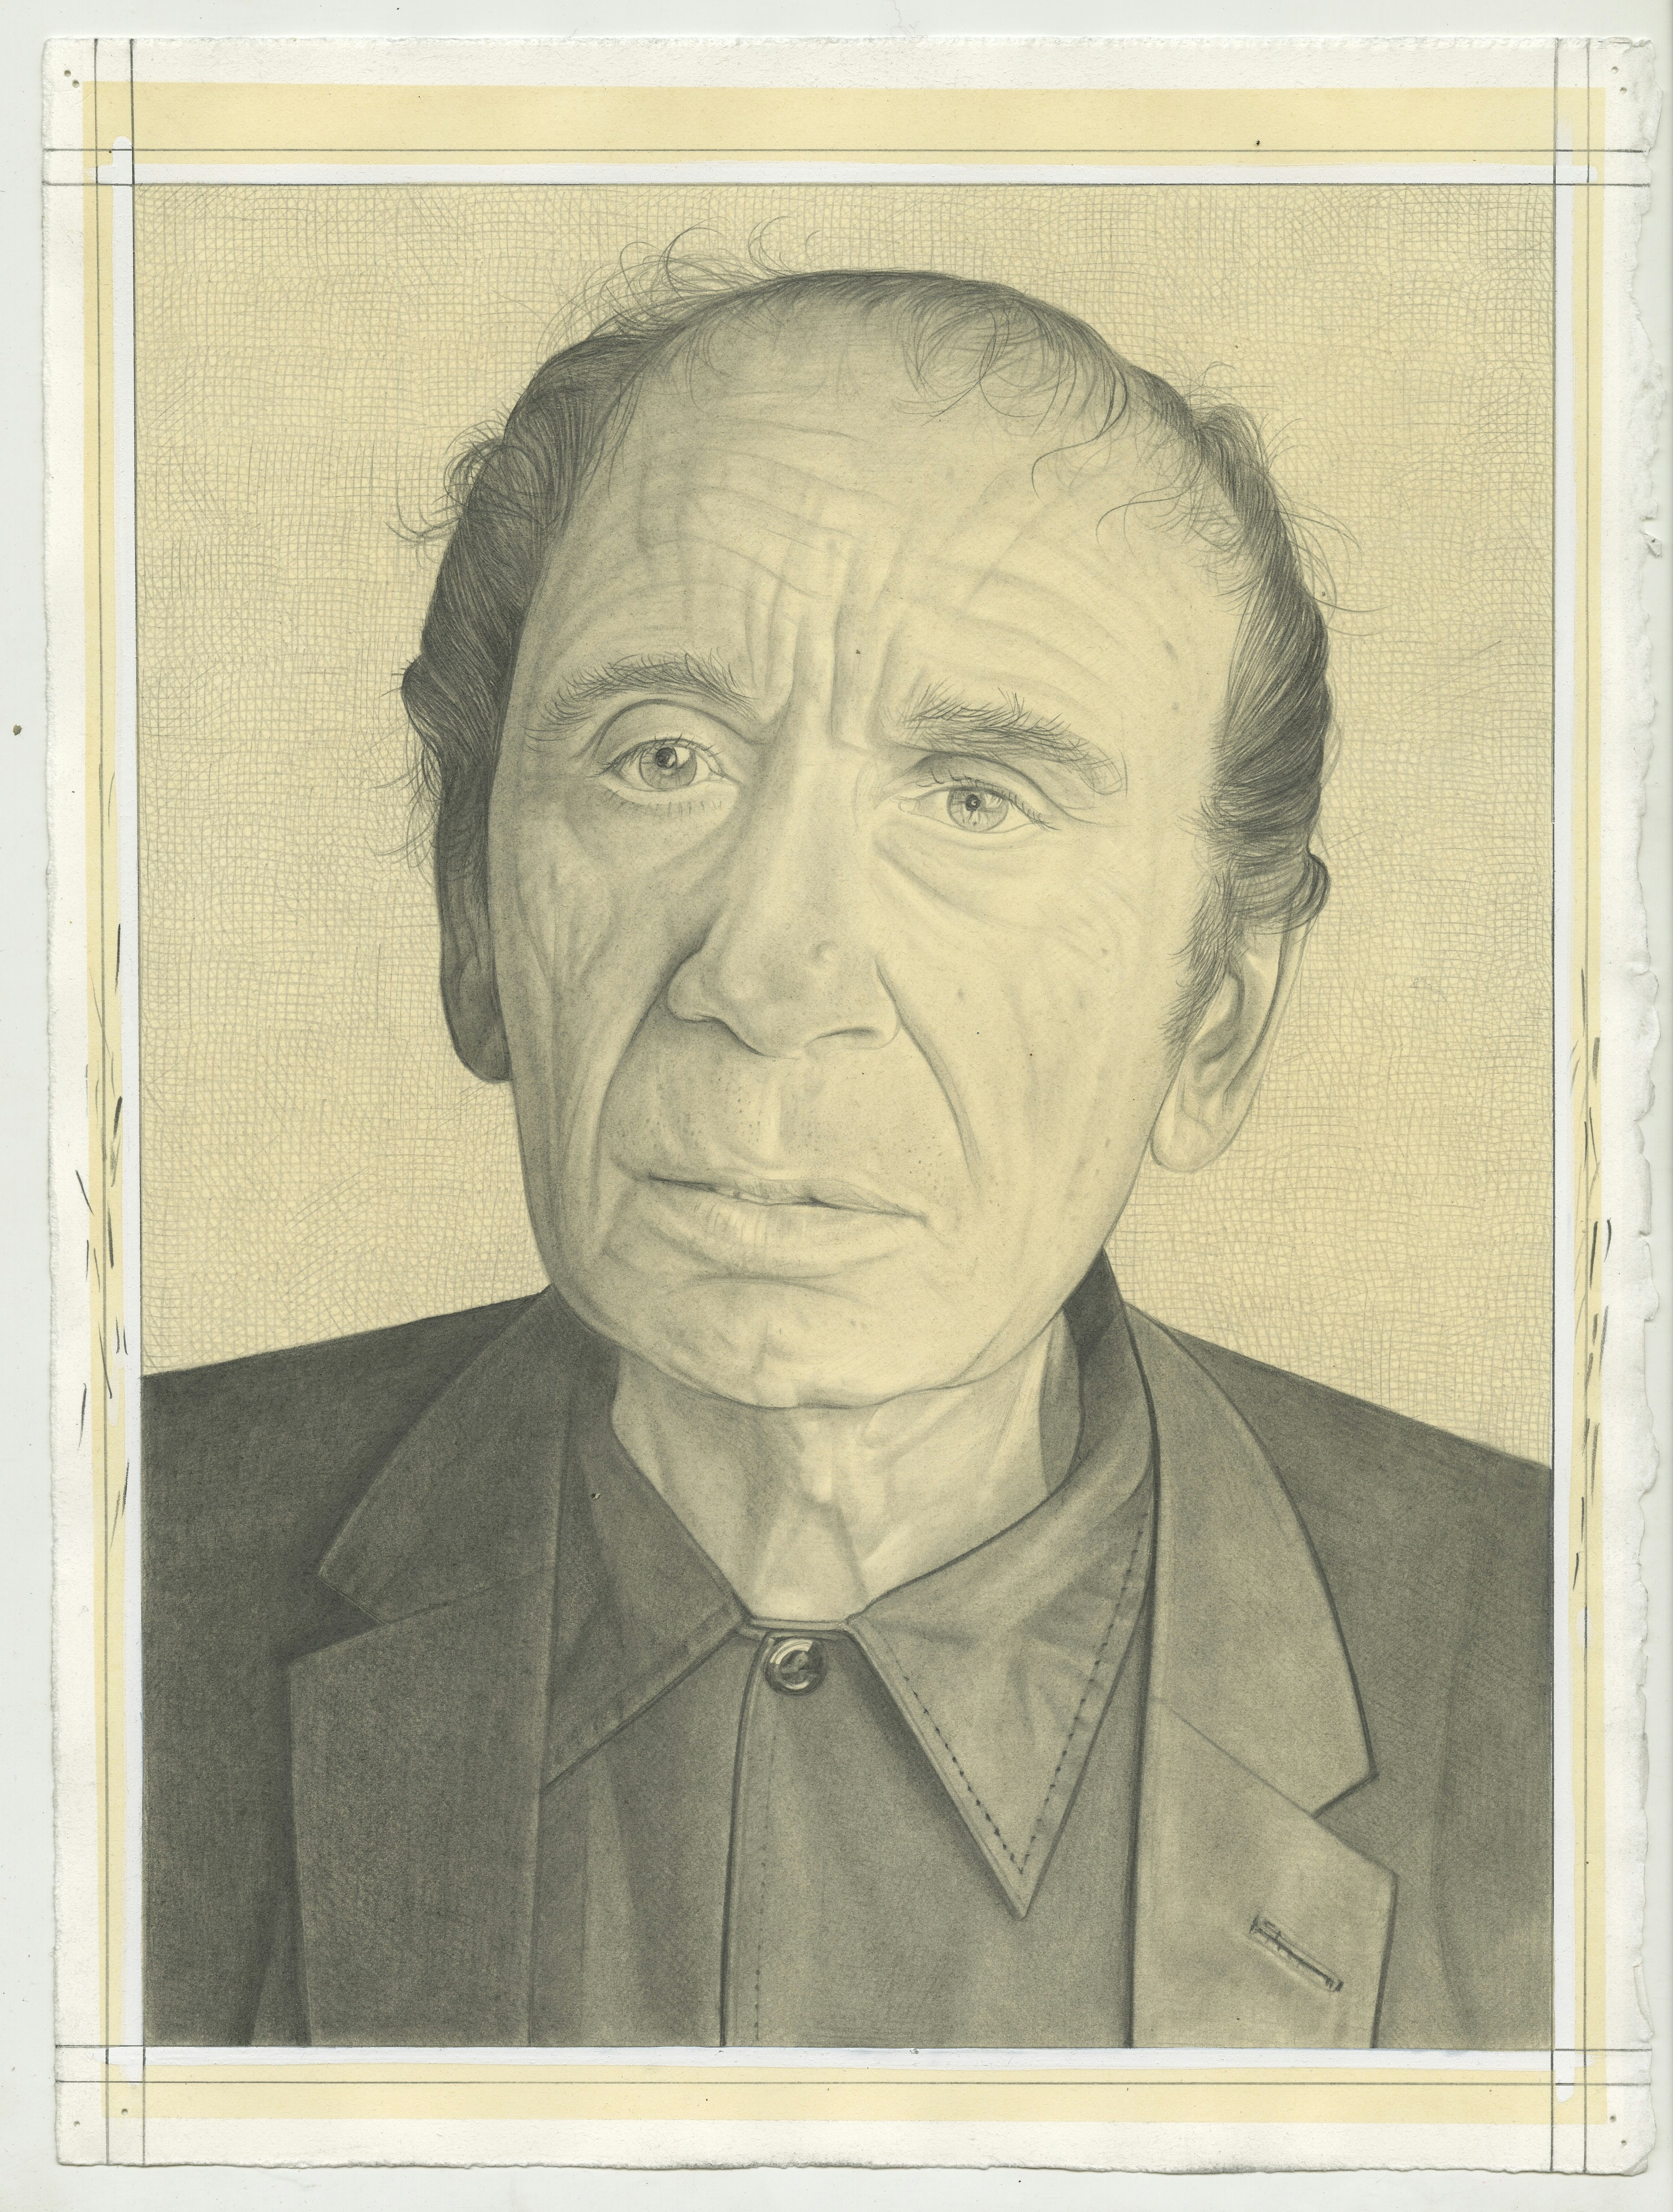 Portrait of Vito Acconci, pencil on paper by Phong Bui.